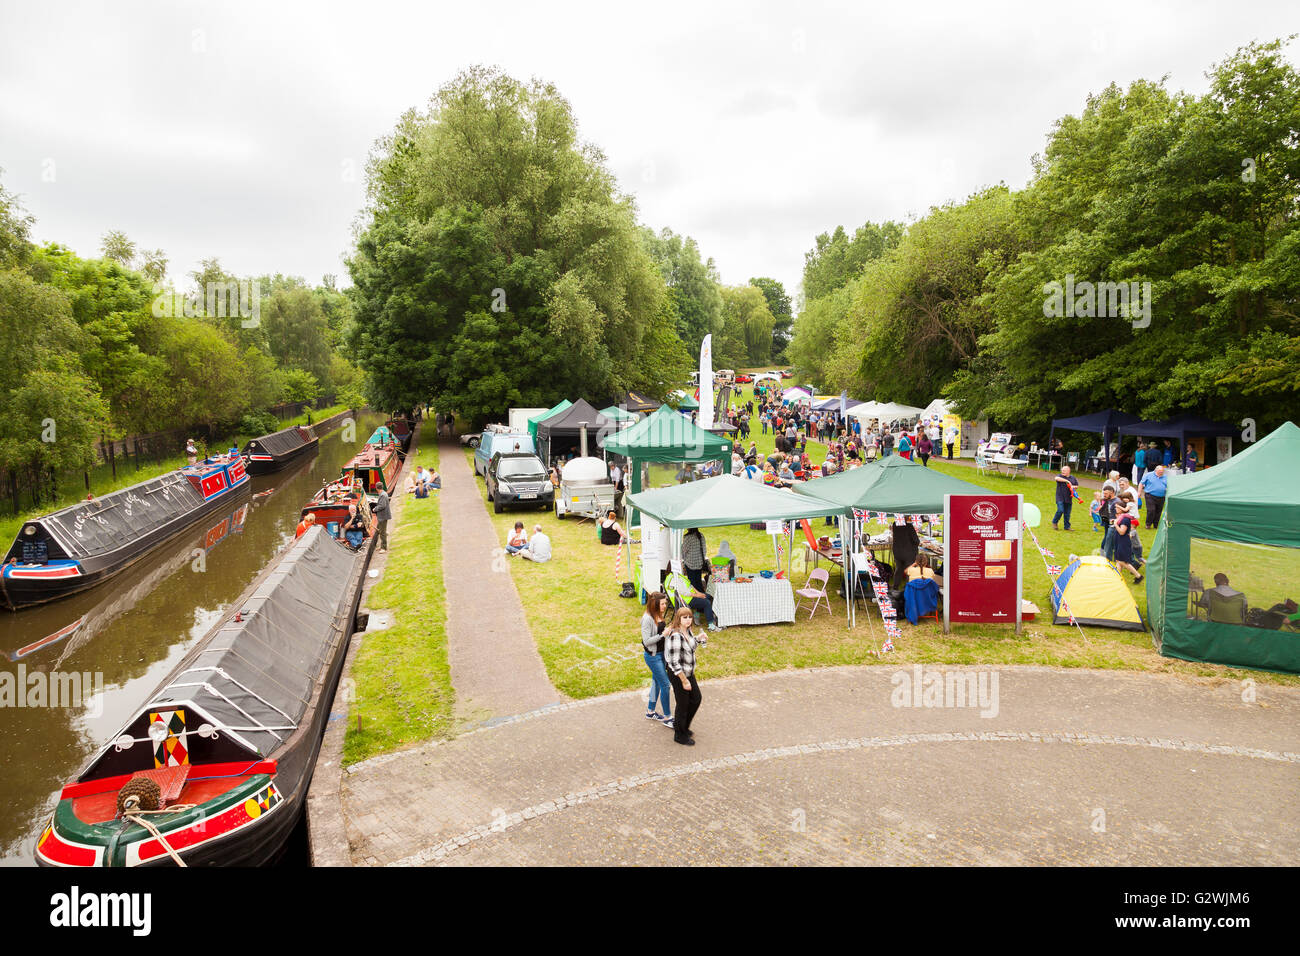 Etruria Canals Festival , Stoke On Trent, England, UK - Saturday 4th June 2016. Visitors enjoying a fun packed day at  Etruria Canals Festival  2016 2 day event.  As part of  this years 2 day event there are celebrations of the 300th anniversary of canal pioneer James Brindley’s birth and the 250th anniversary of cutting the first sod of the Trent and Mersey Canal. Stock Photo